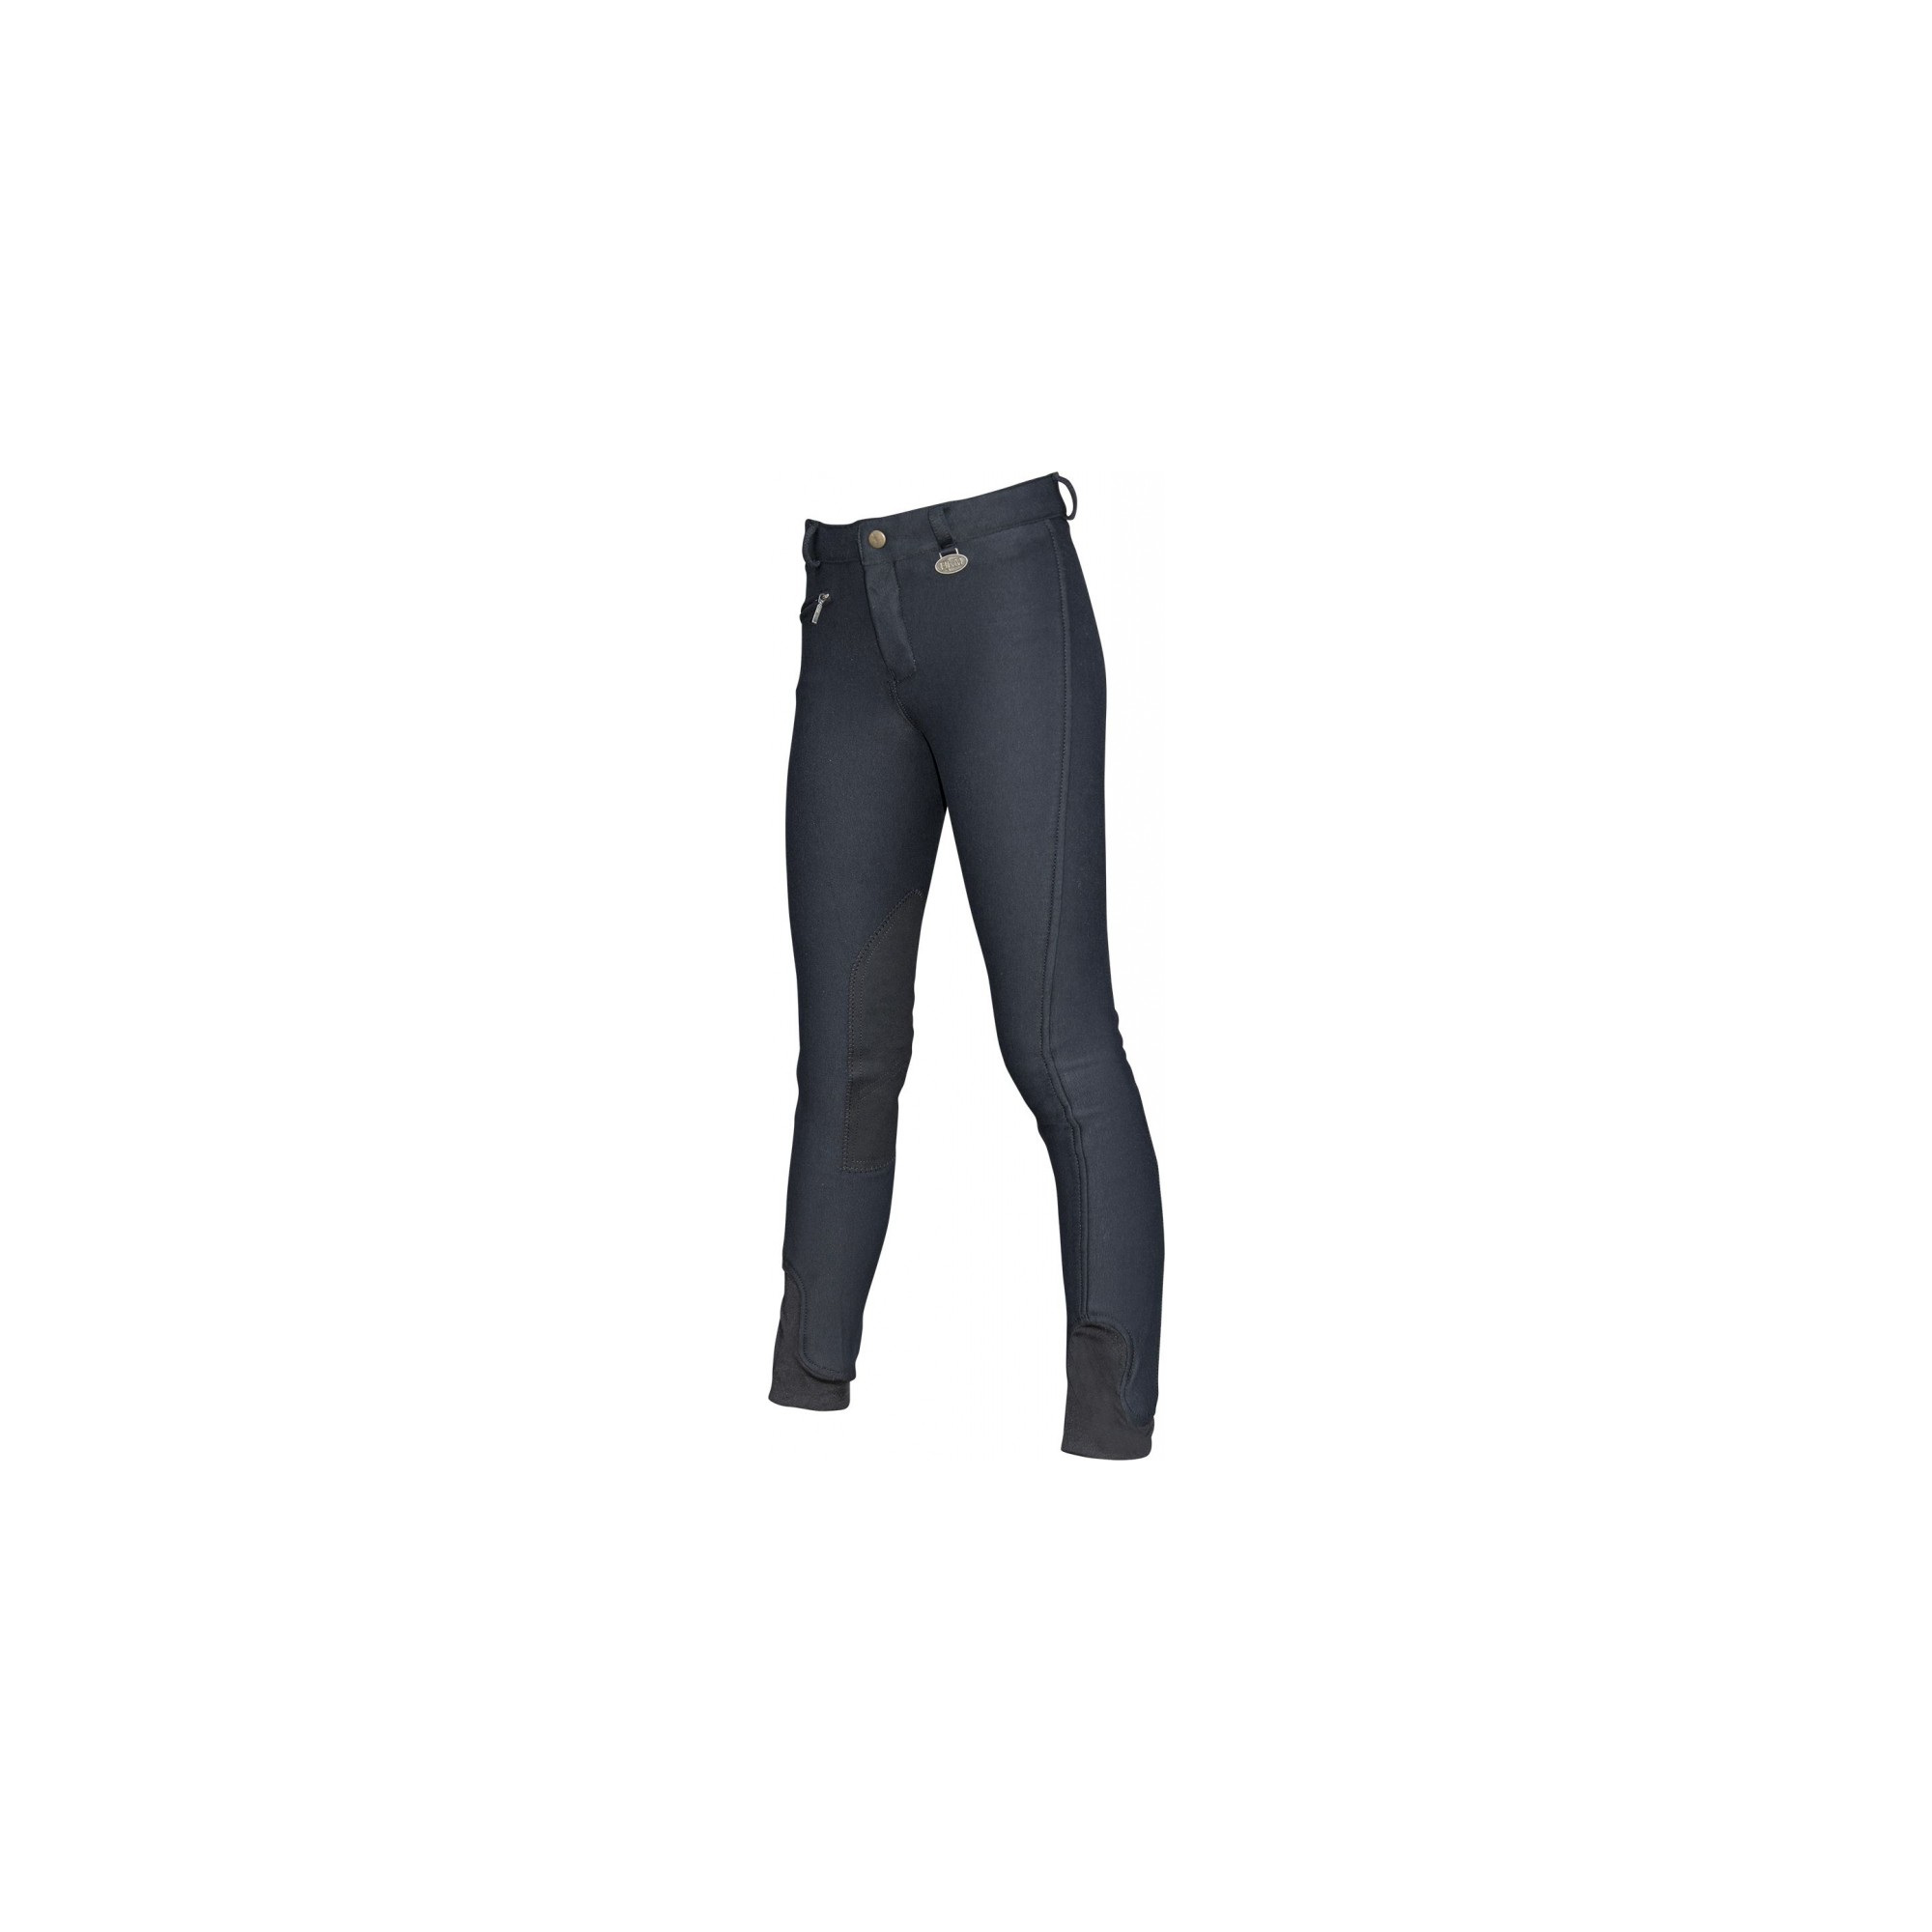 HKM Winter Softshell Breeches Winter Easy highly Water Resistant & Insulated ALL 